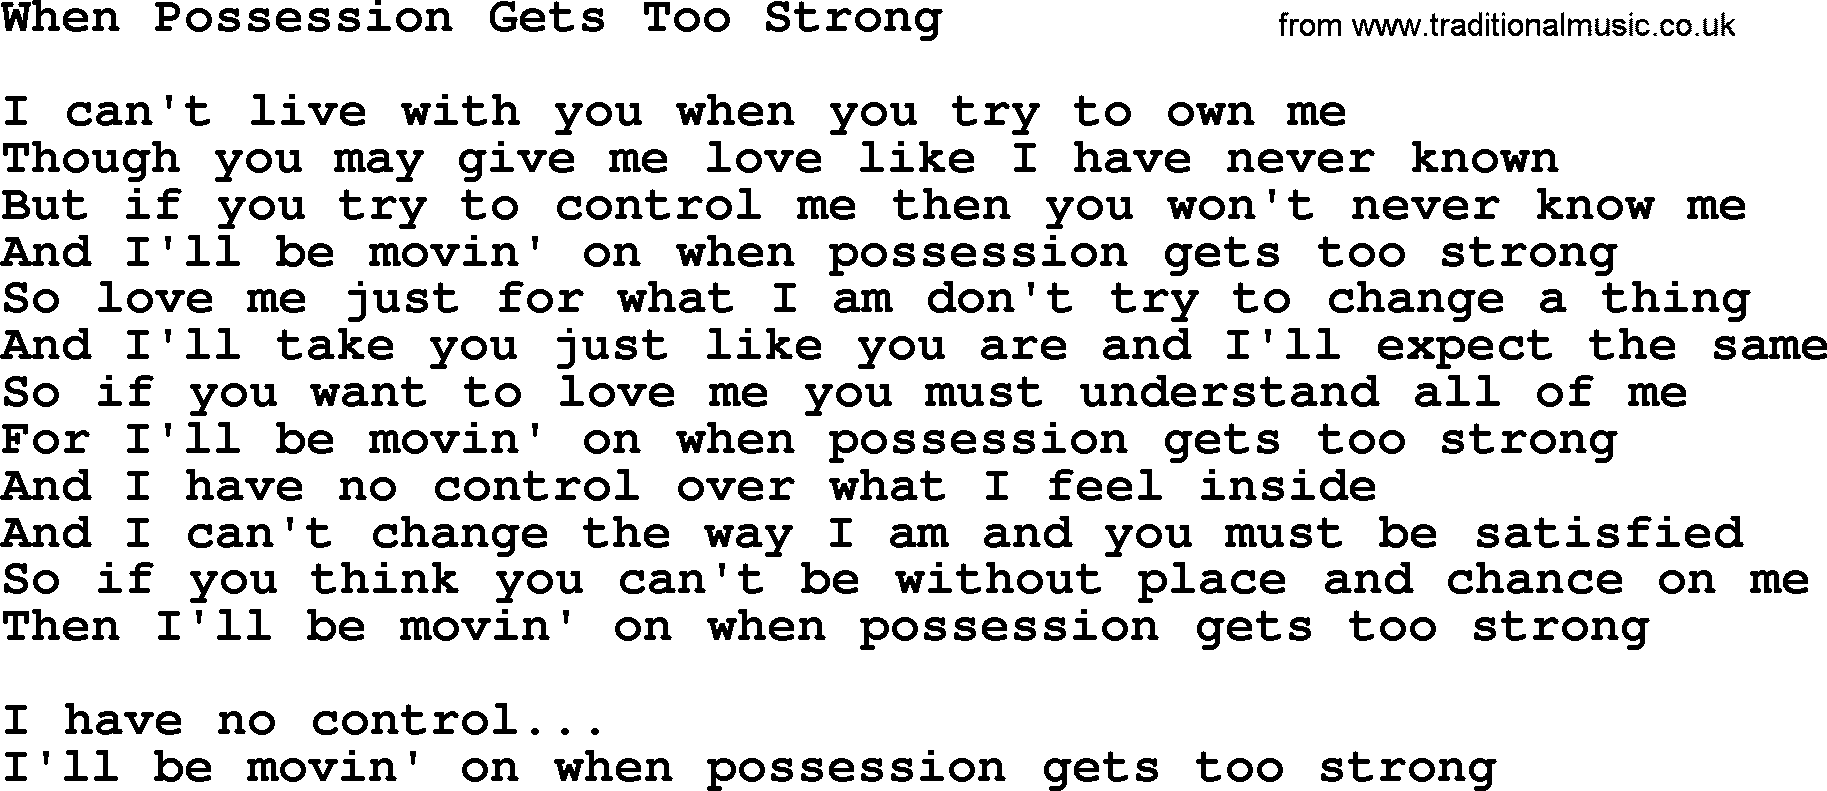 Dolly Parton song When Possession Gets Too Strong.txt lyrics